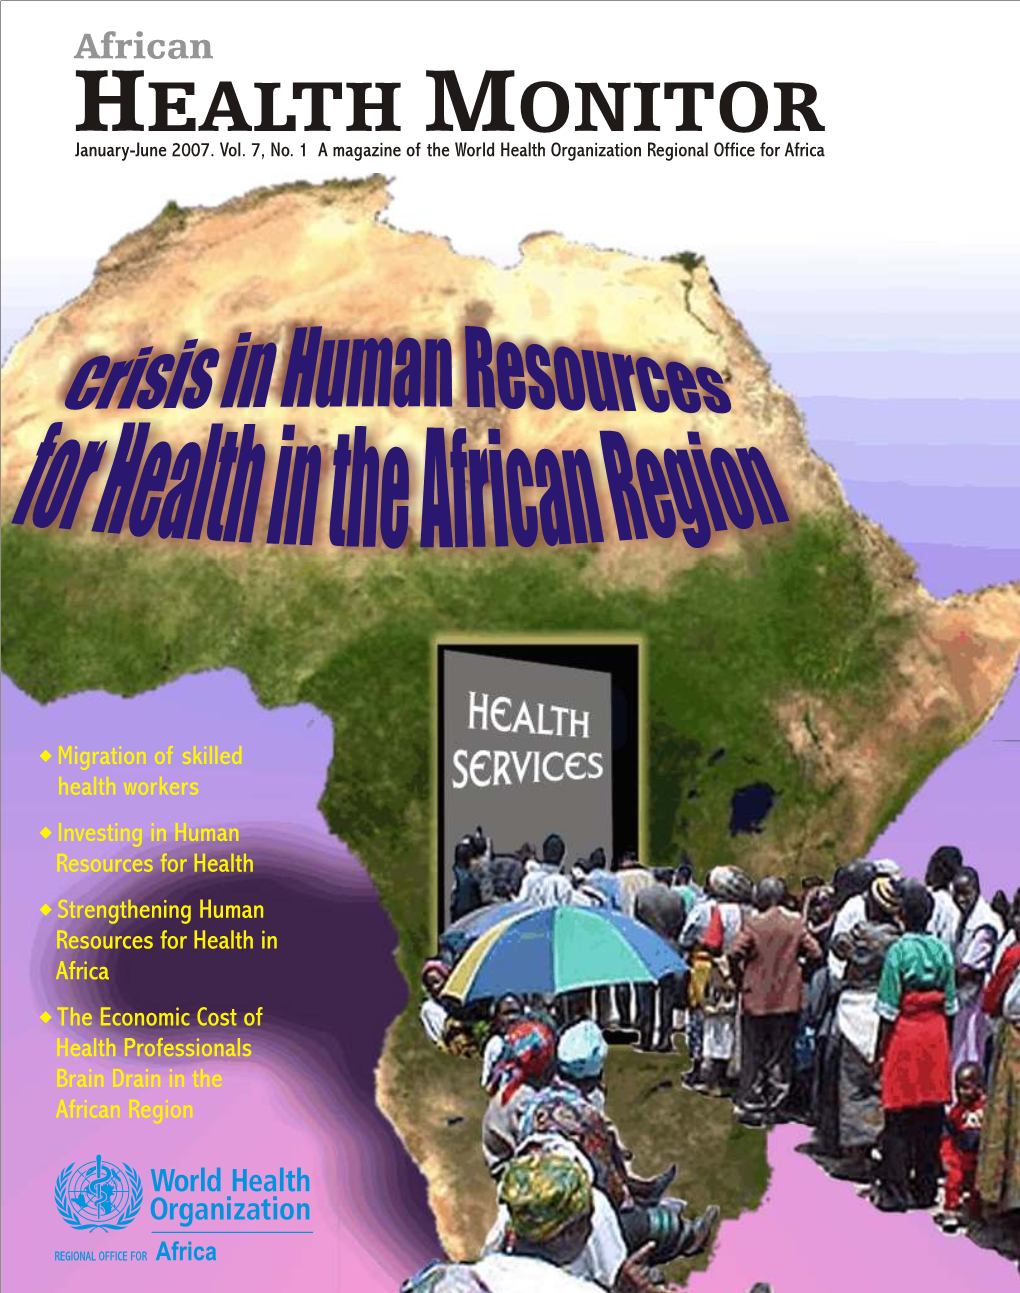 African Health Monitor Crisis in Human Resources for Health in The